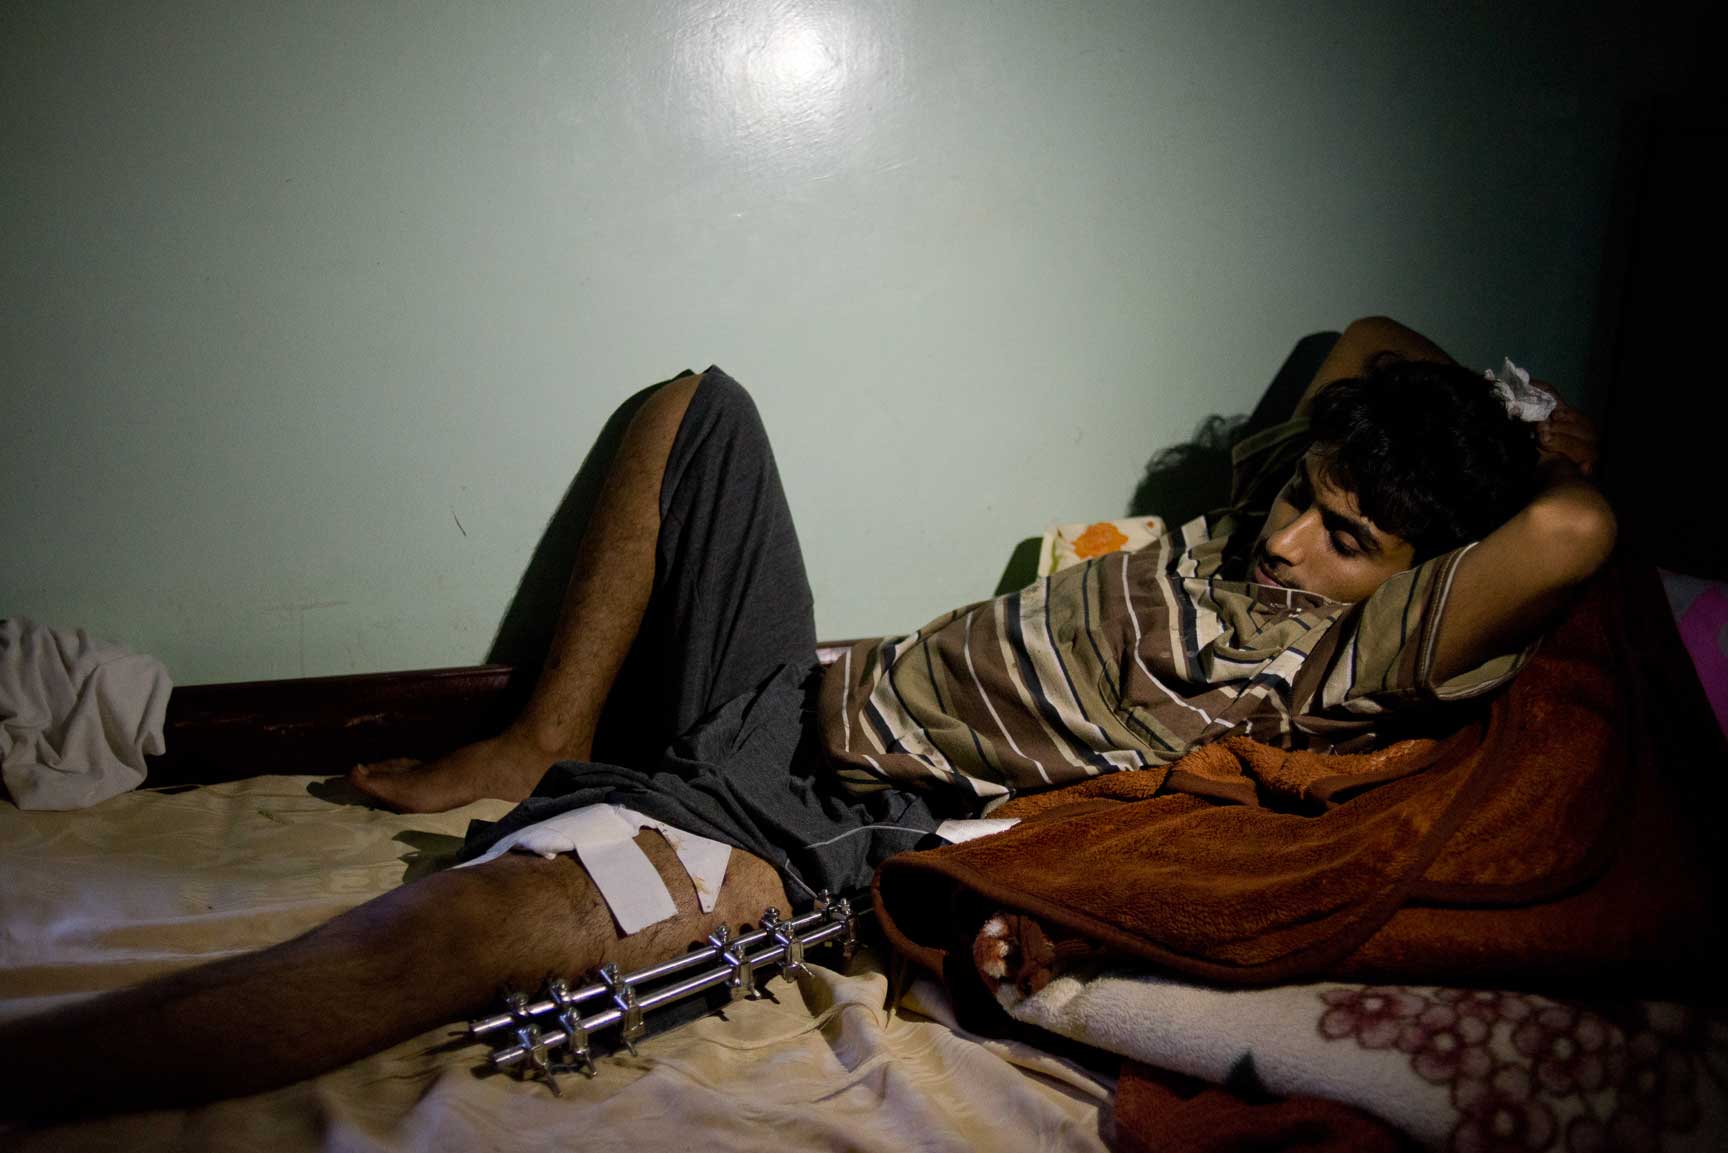 A young Yemeni man lays recovering from his injuries in Amran Hospital on Tuesday, July 7, 2015 in Amran, Yemen.